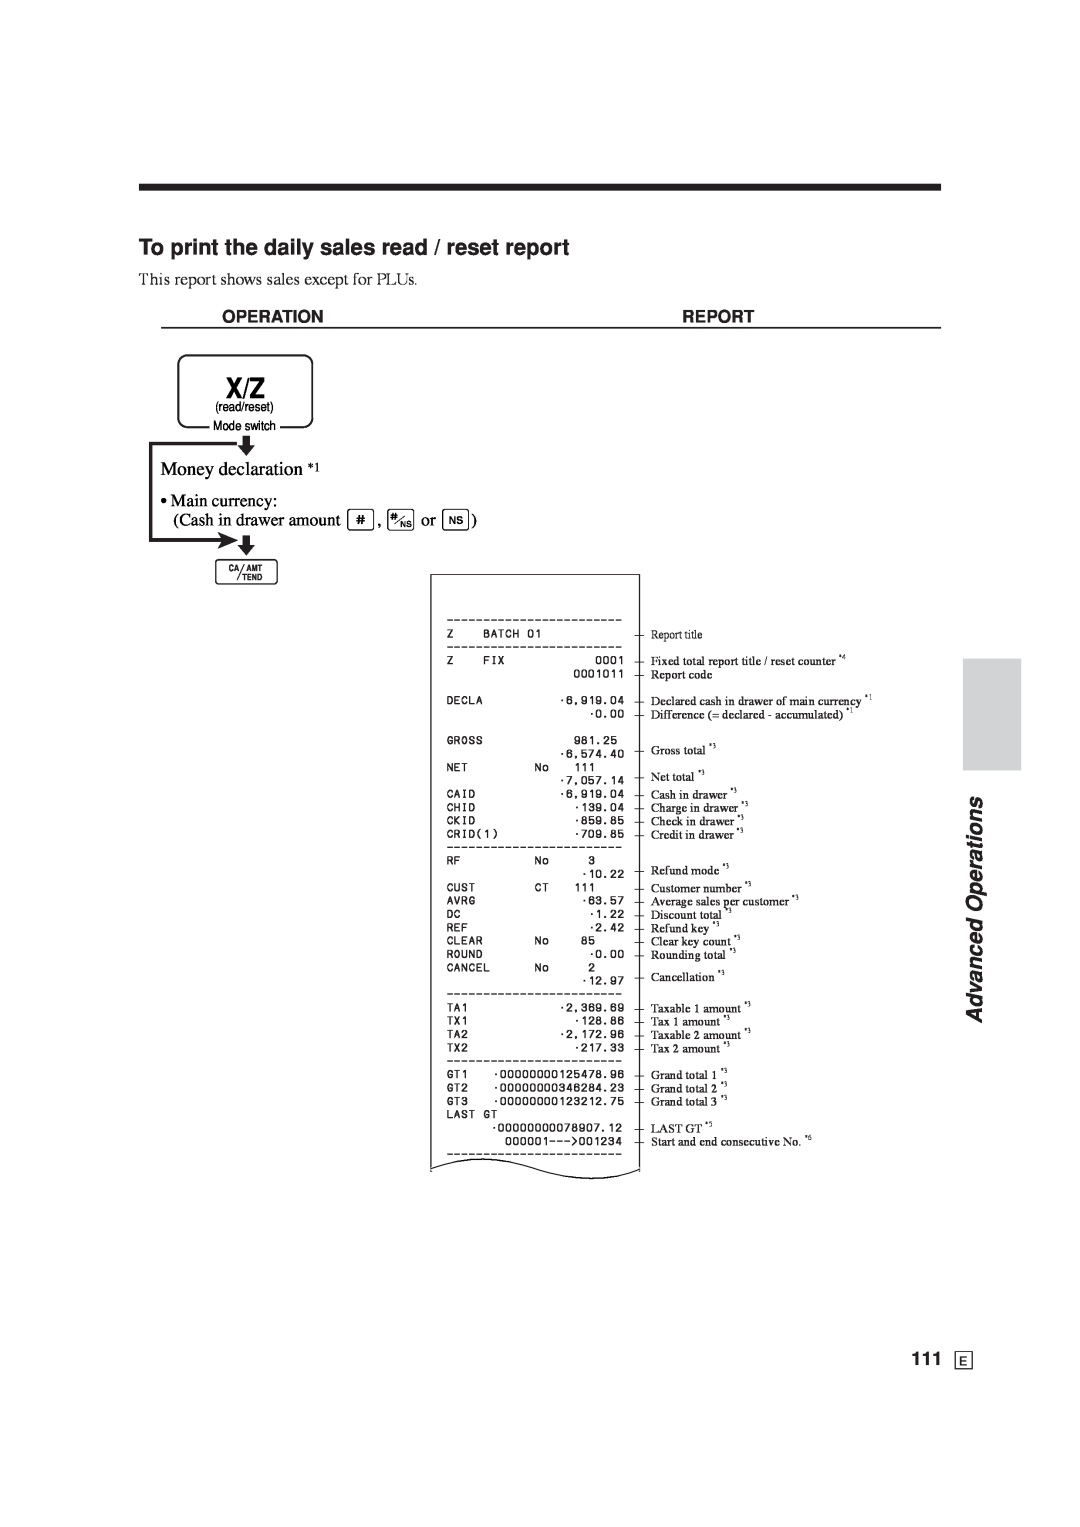 Casio SE-C6000, SE-S6000 user manual To print the daily sales read / reset report, 111 E, Advanced Operations 